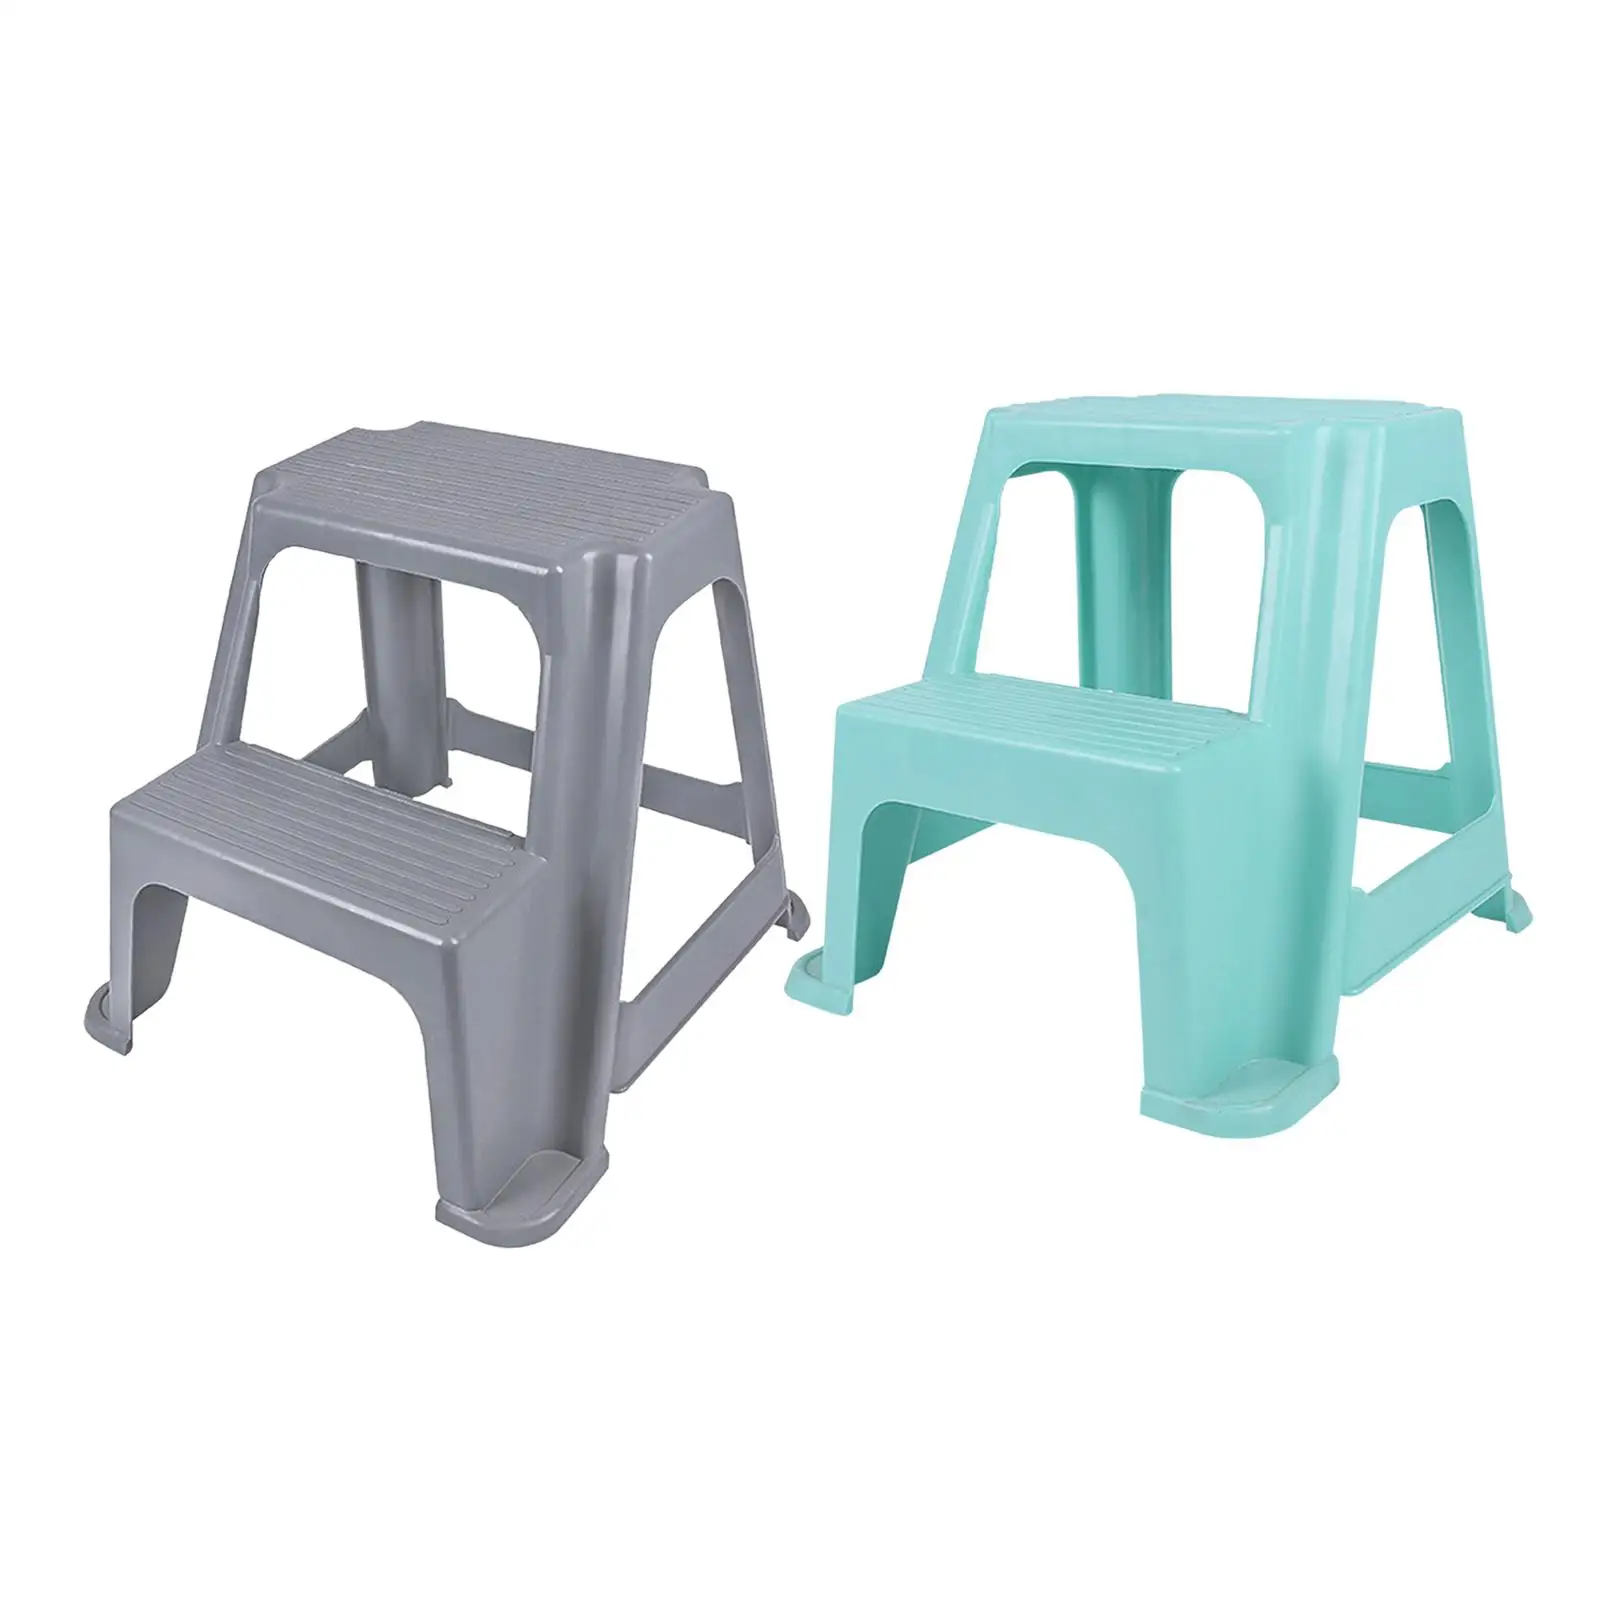 2 Step Stool Lightweight Stepping Stool Two Step Stool for Kids Adults